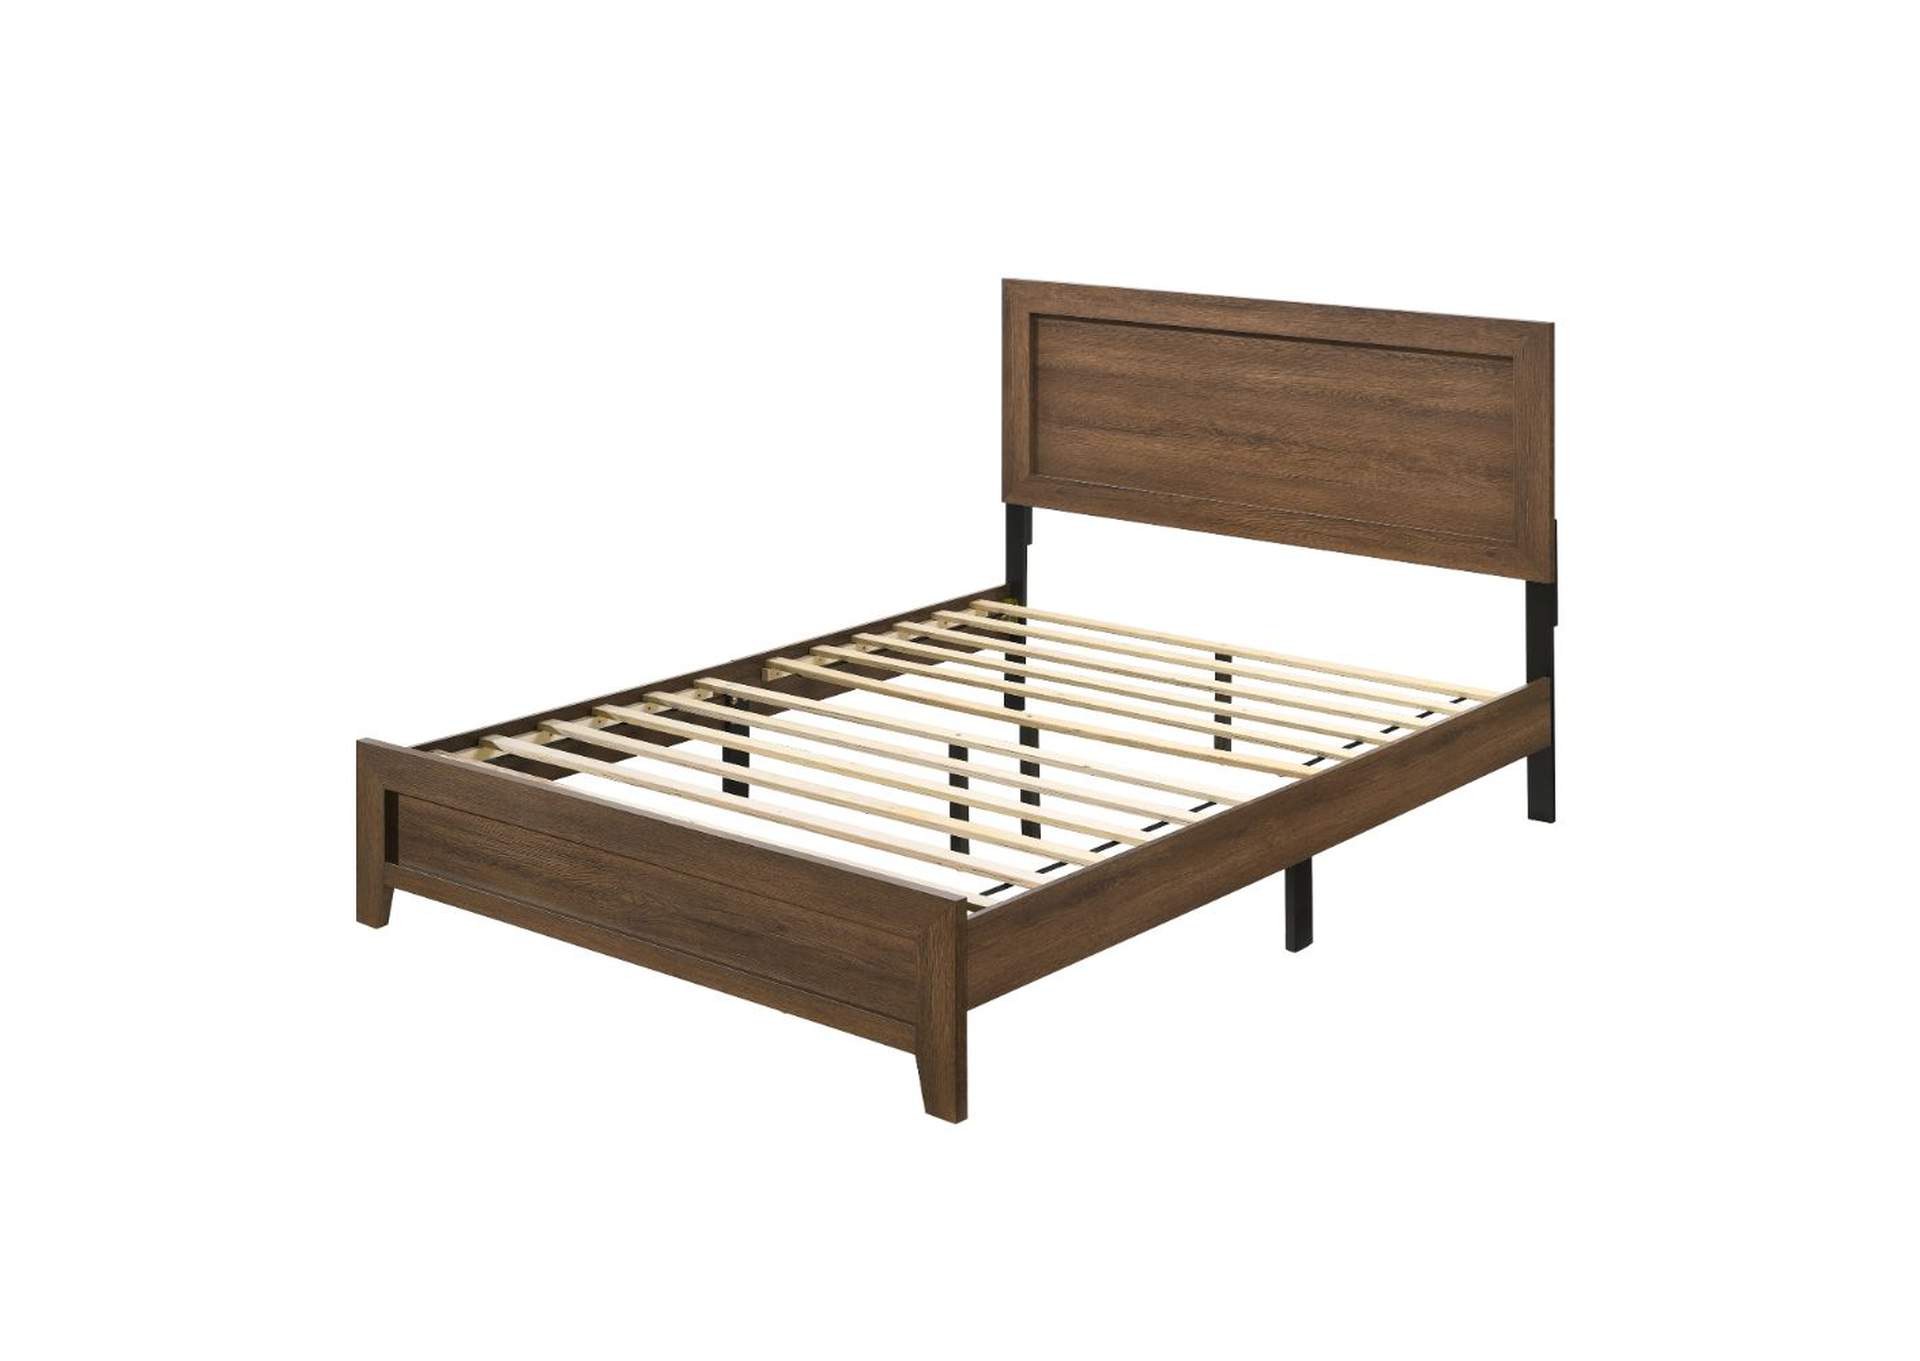 Miquell Queen Bed,Acme